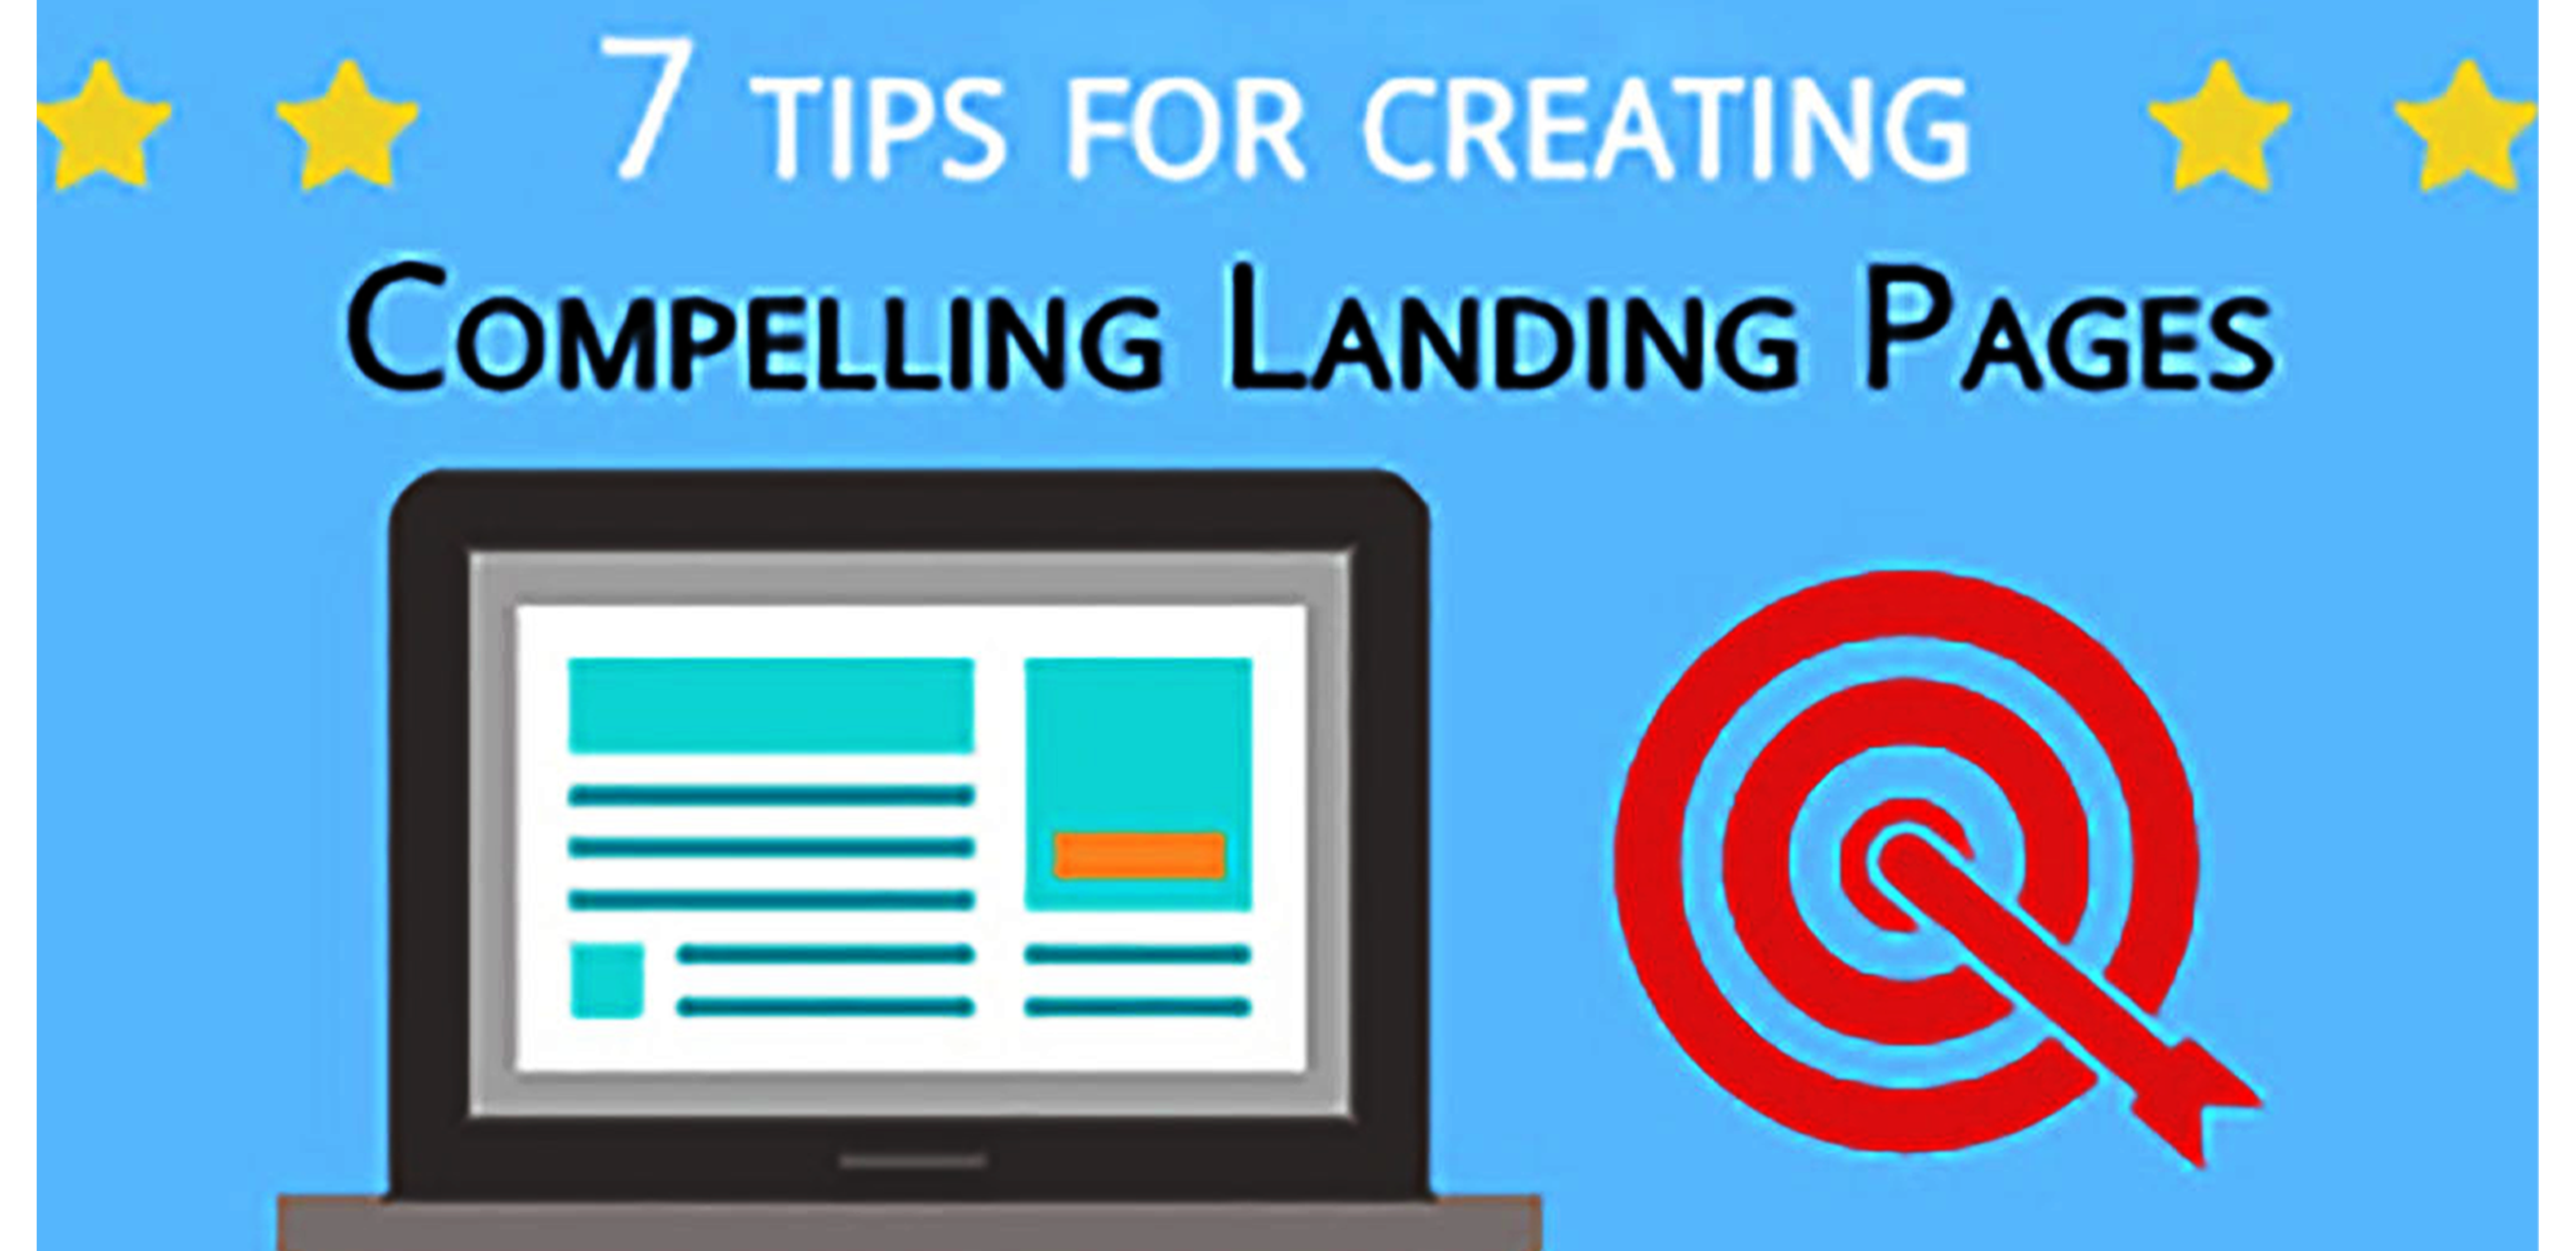 WHY IS A LANDING PAGE IMPORTANT ? HERE ARE FEW REASONS TO CONSIDER